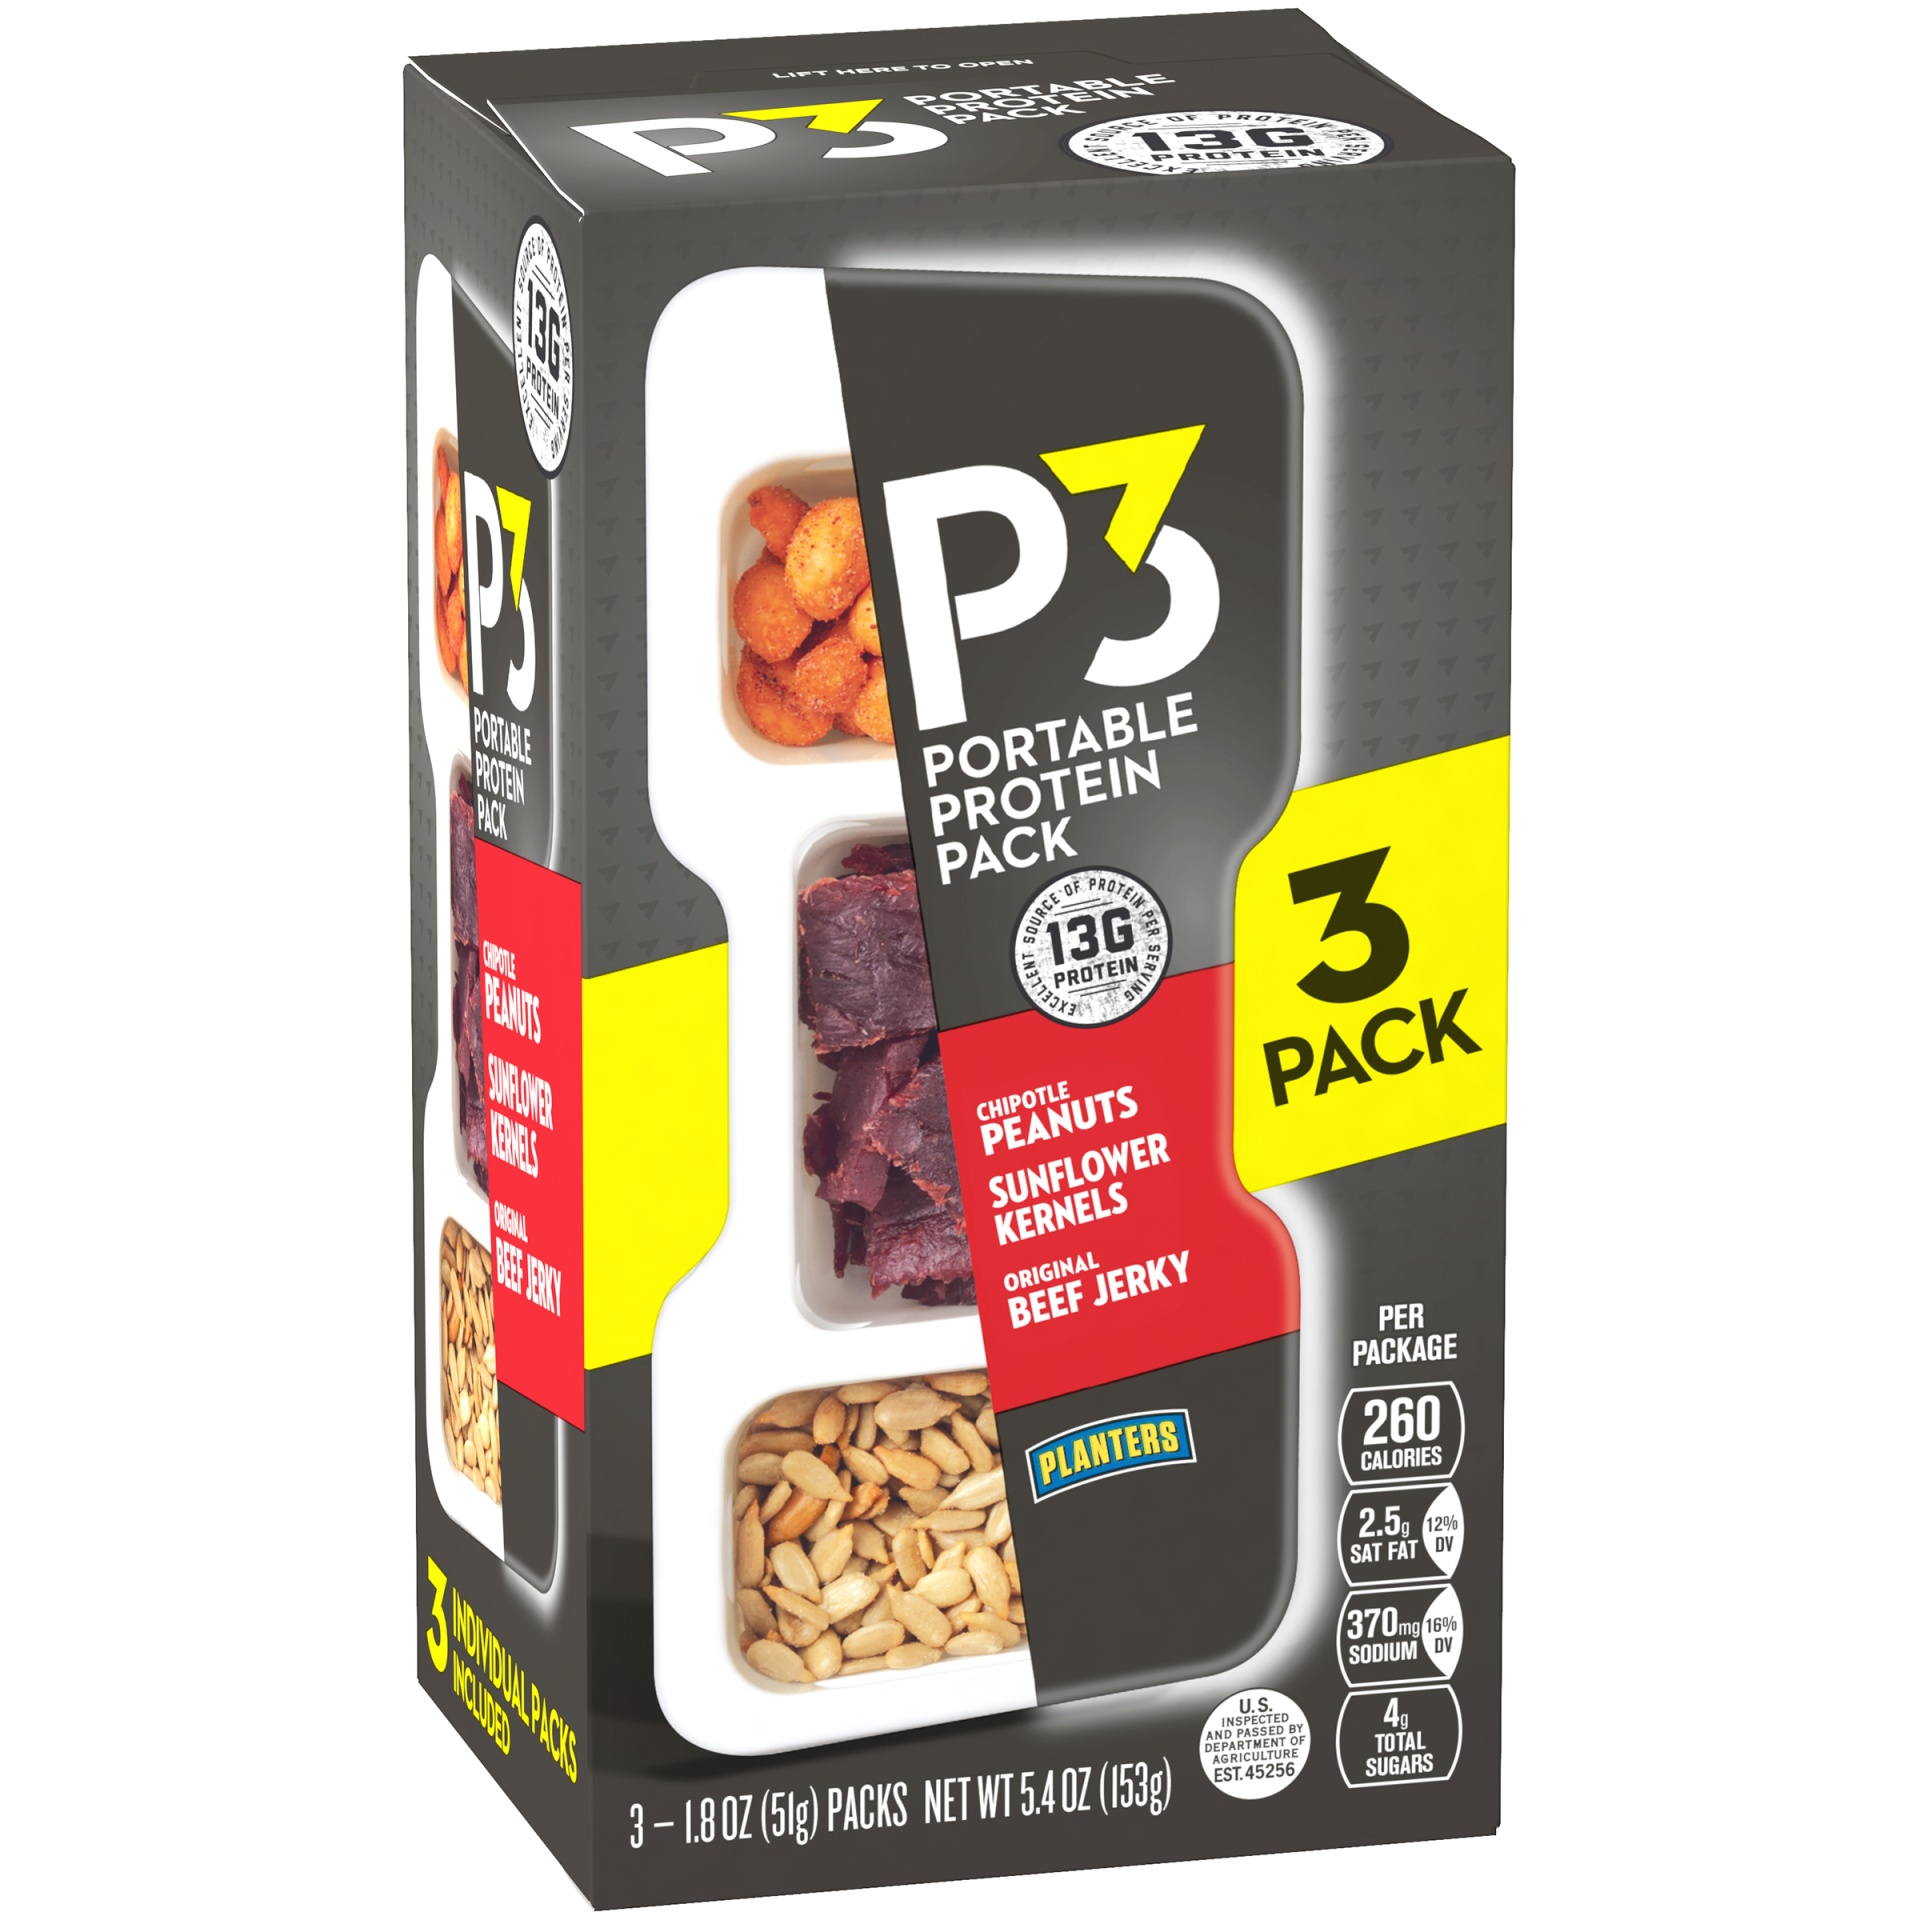 slide 2 of 6, P3 Portable Protein Snack Pack with Chipotle Peanuts, Sunflower Kernels & Original Beef Jerky Trays, 3 ct; 5.4 oz